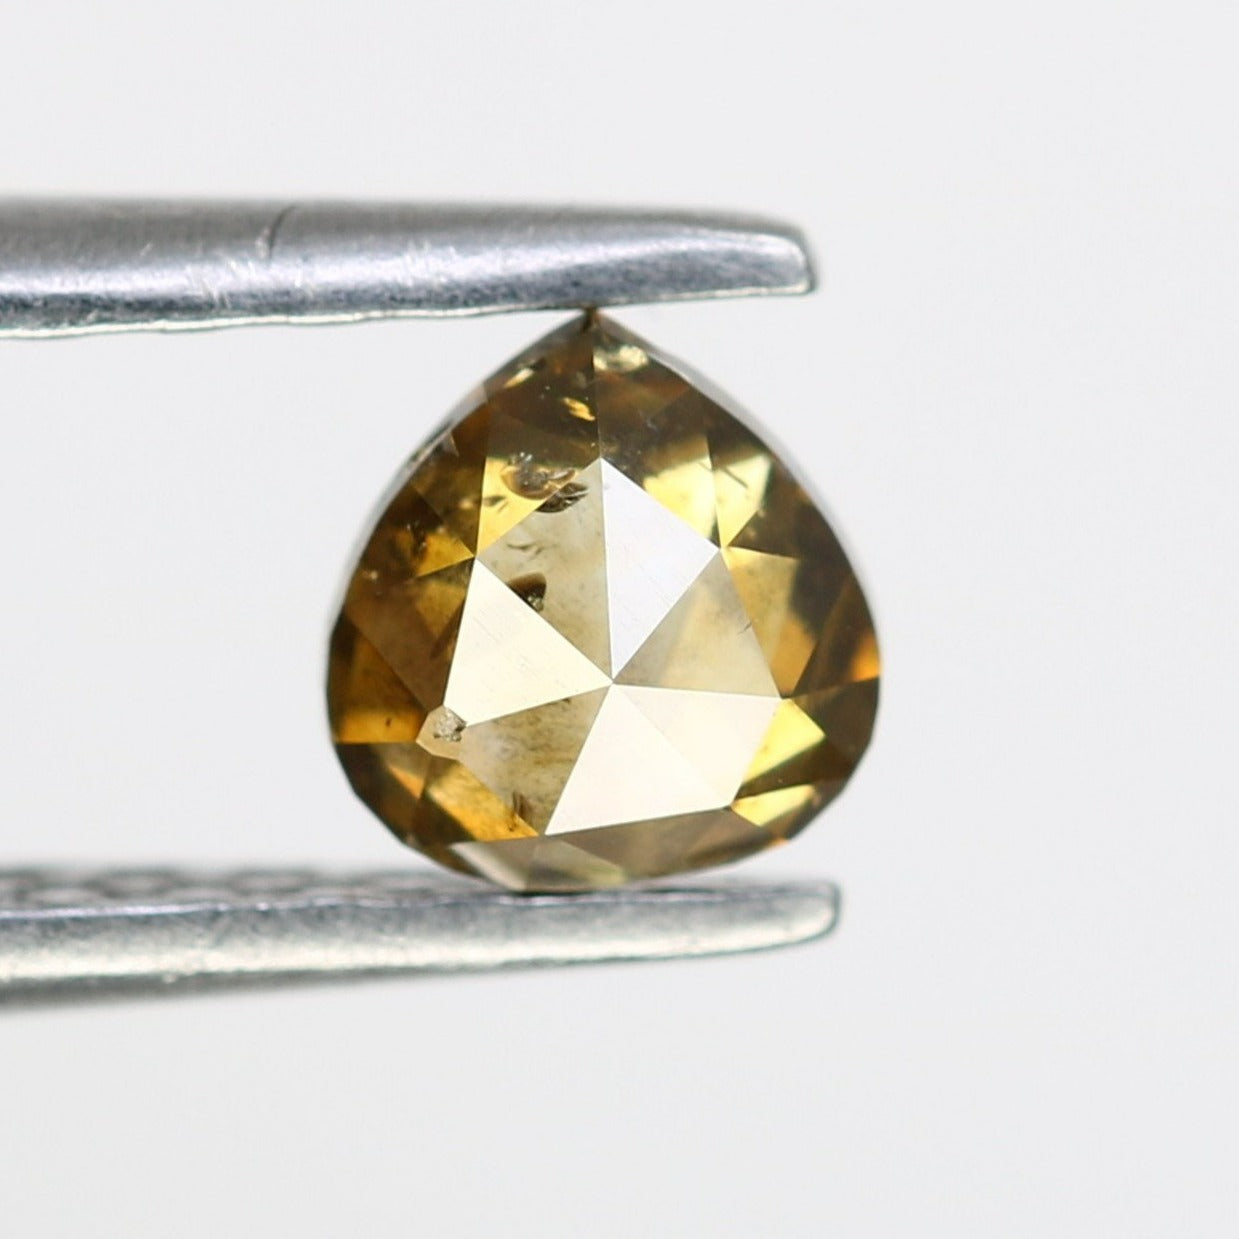 0.39 CT 4.5 MM Natural Brown Pear Shaped Loose Diamond For Galaxy Ring